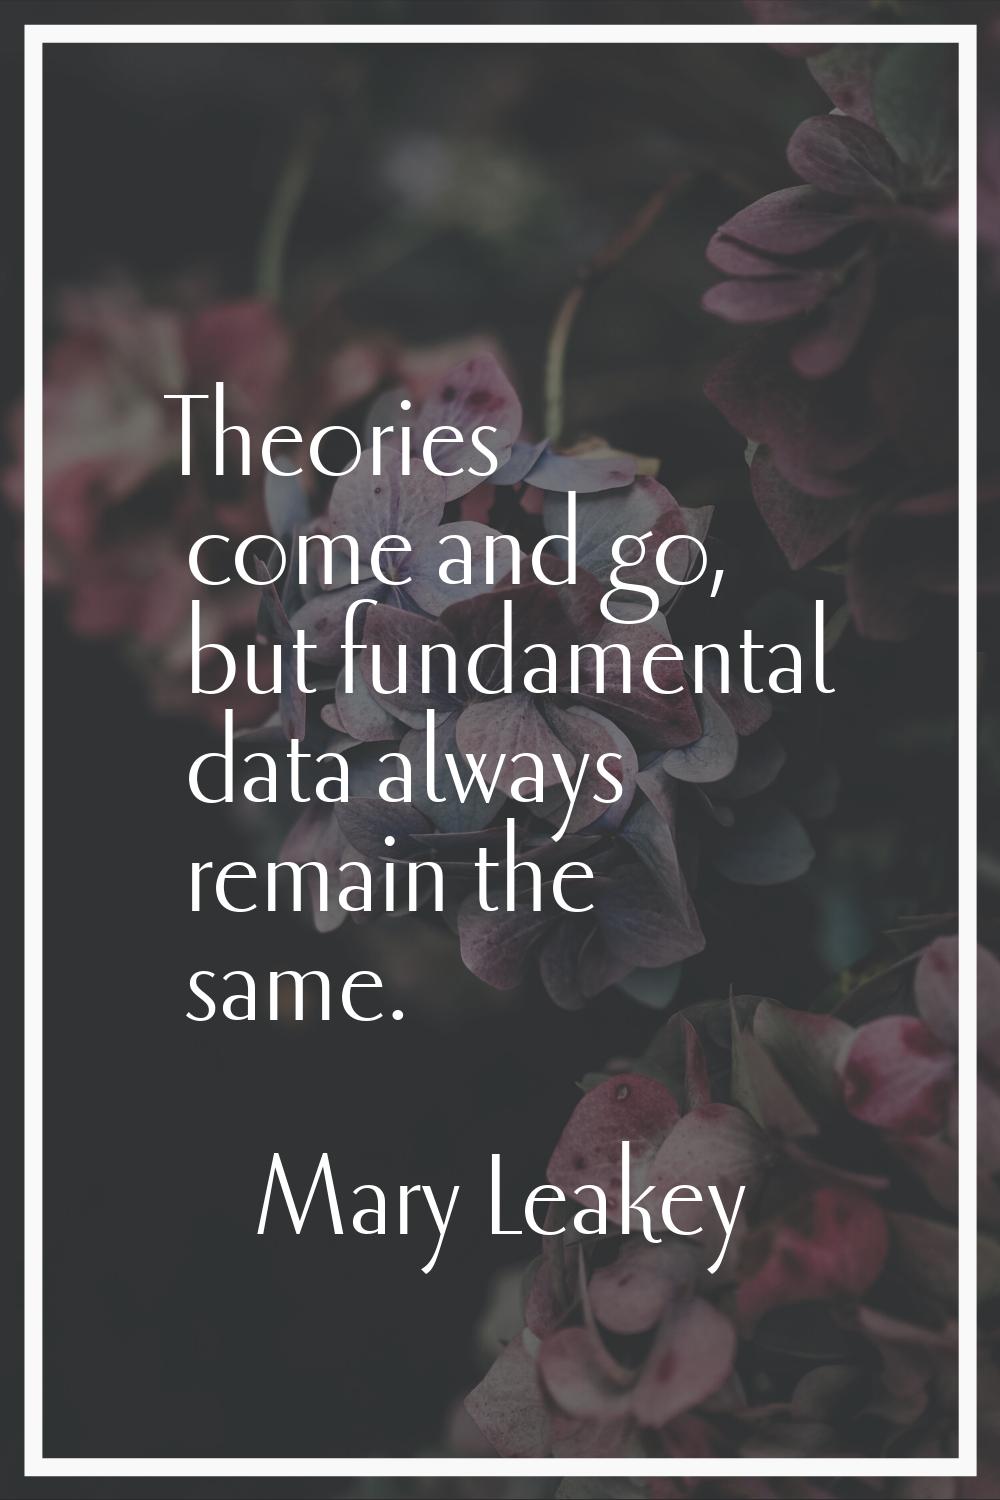 Theories come and go, but fundamental data always remain the same.